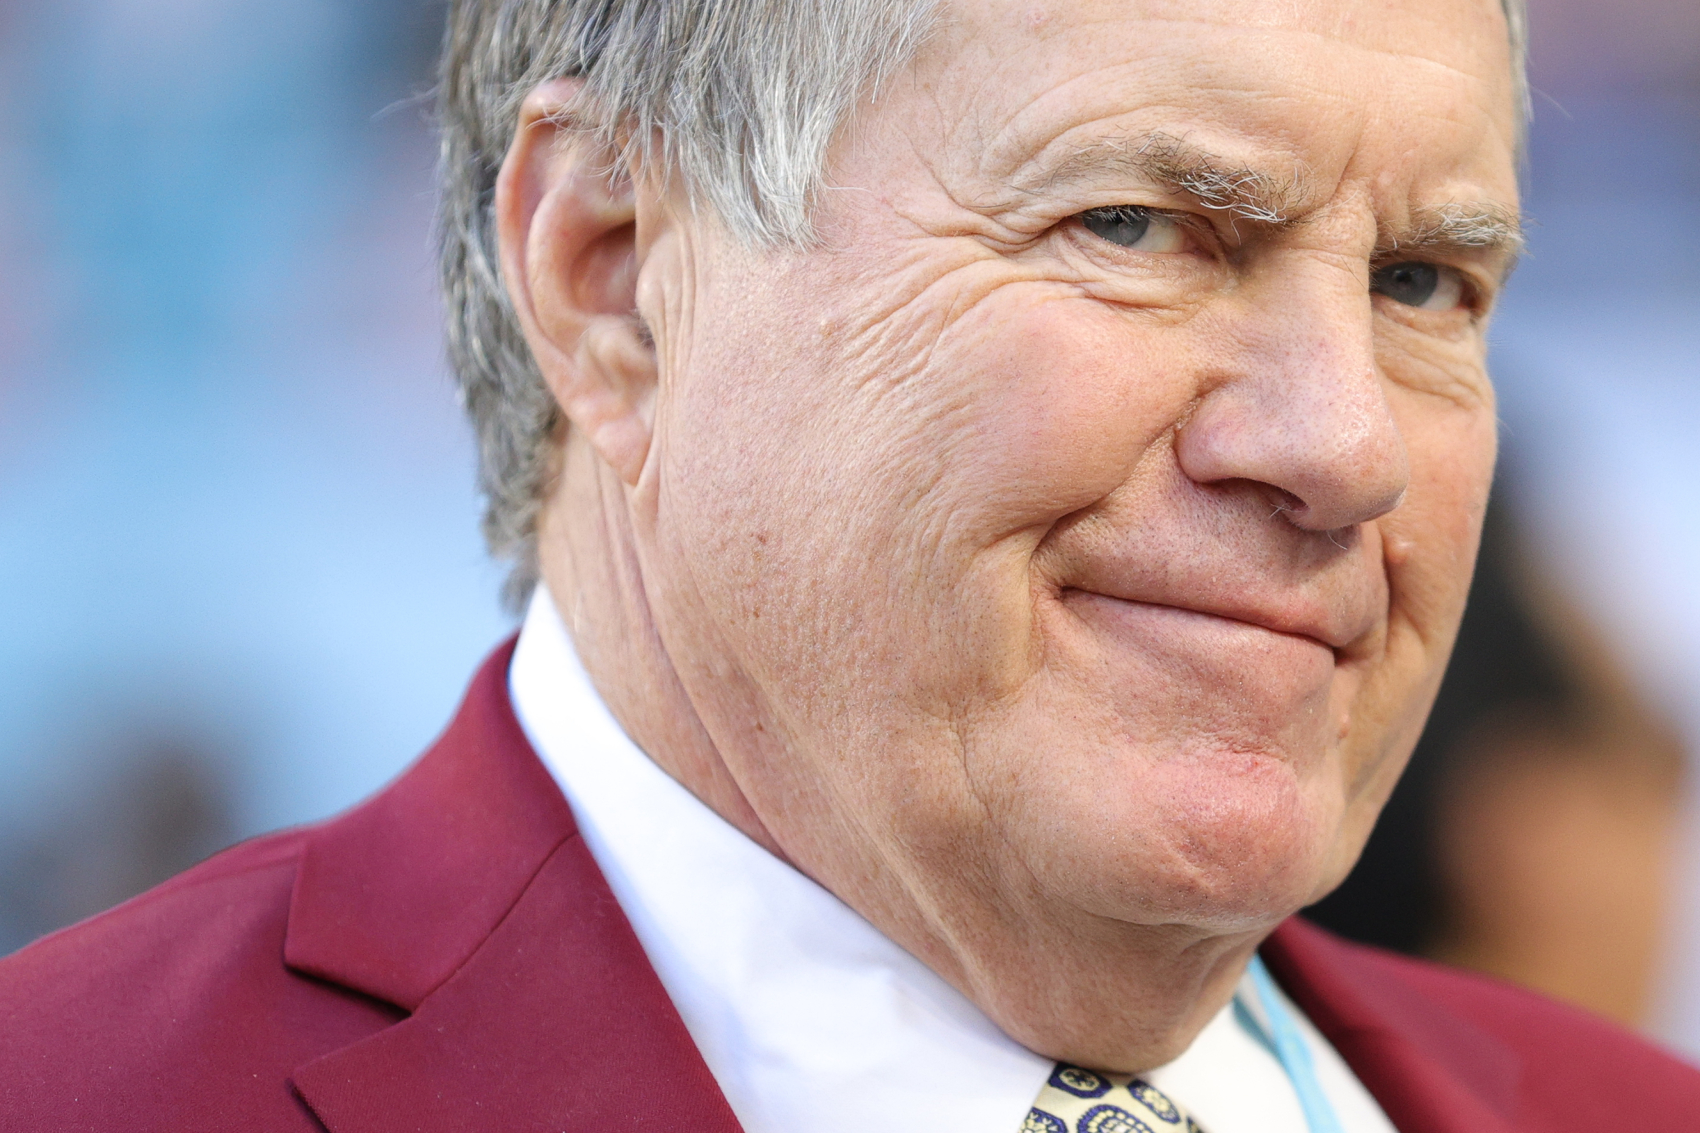 Bill Belichick has a new quarterback on the Patriots in Cam Newton. He actually just recently gave him the strangest compliment.